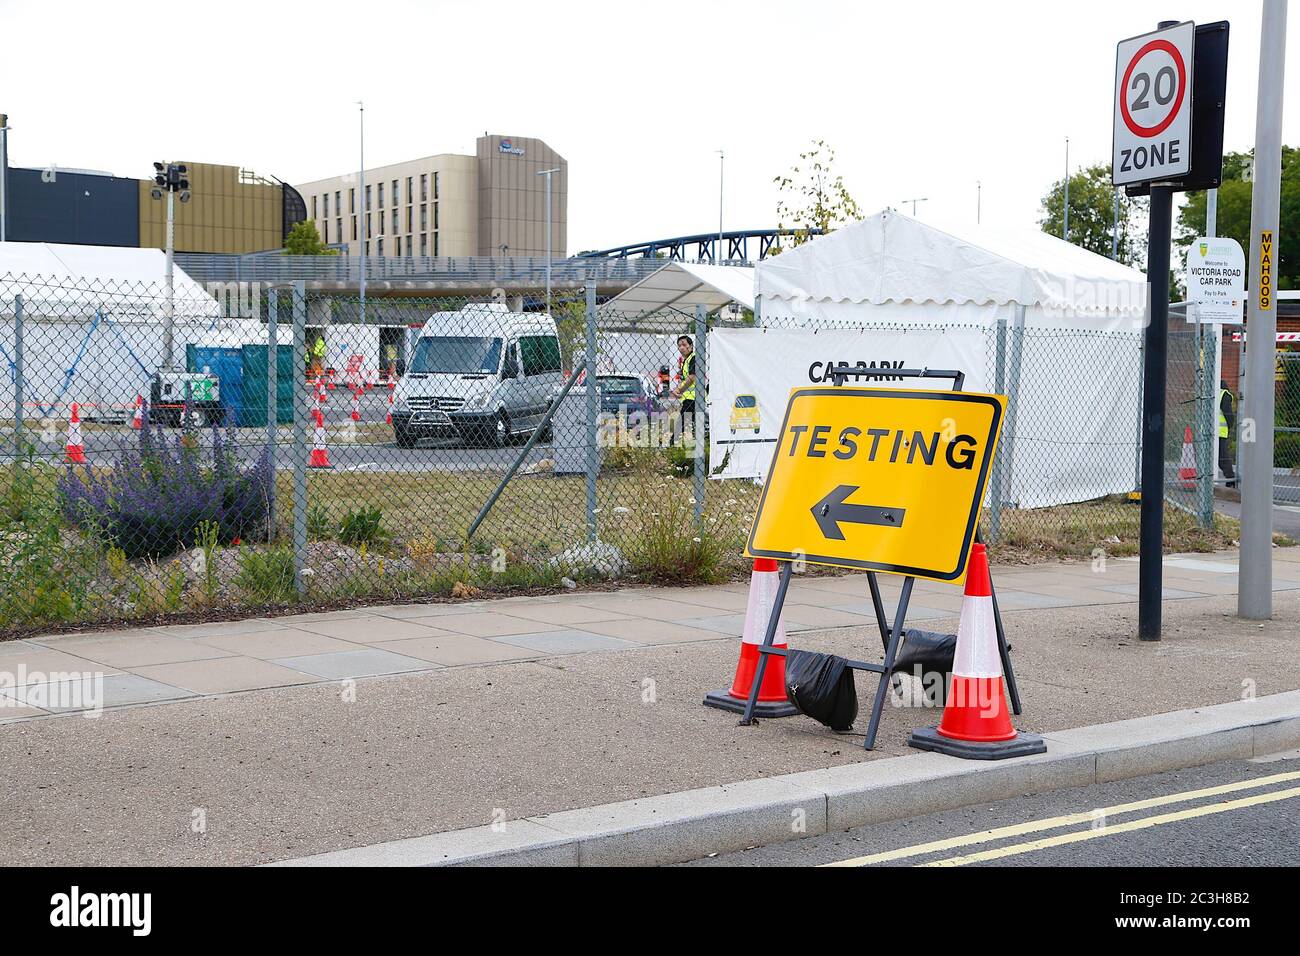 Ashford, Kent, UK. 20 June, 2020. Following the announcement by the government that non essential shops can open, the Ashford town centre high street appears busier than it has in the past few months of the Coronavirus pandemic during the first weekend of shops opening. Ashford COVID 19 testing station. Credit: Alamy Live News Stock Photo